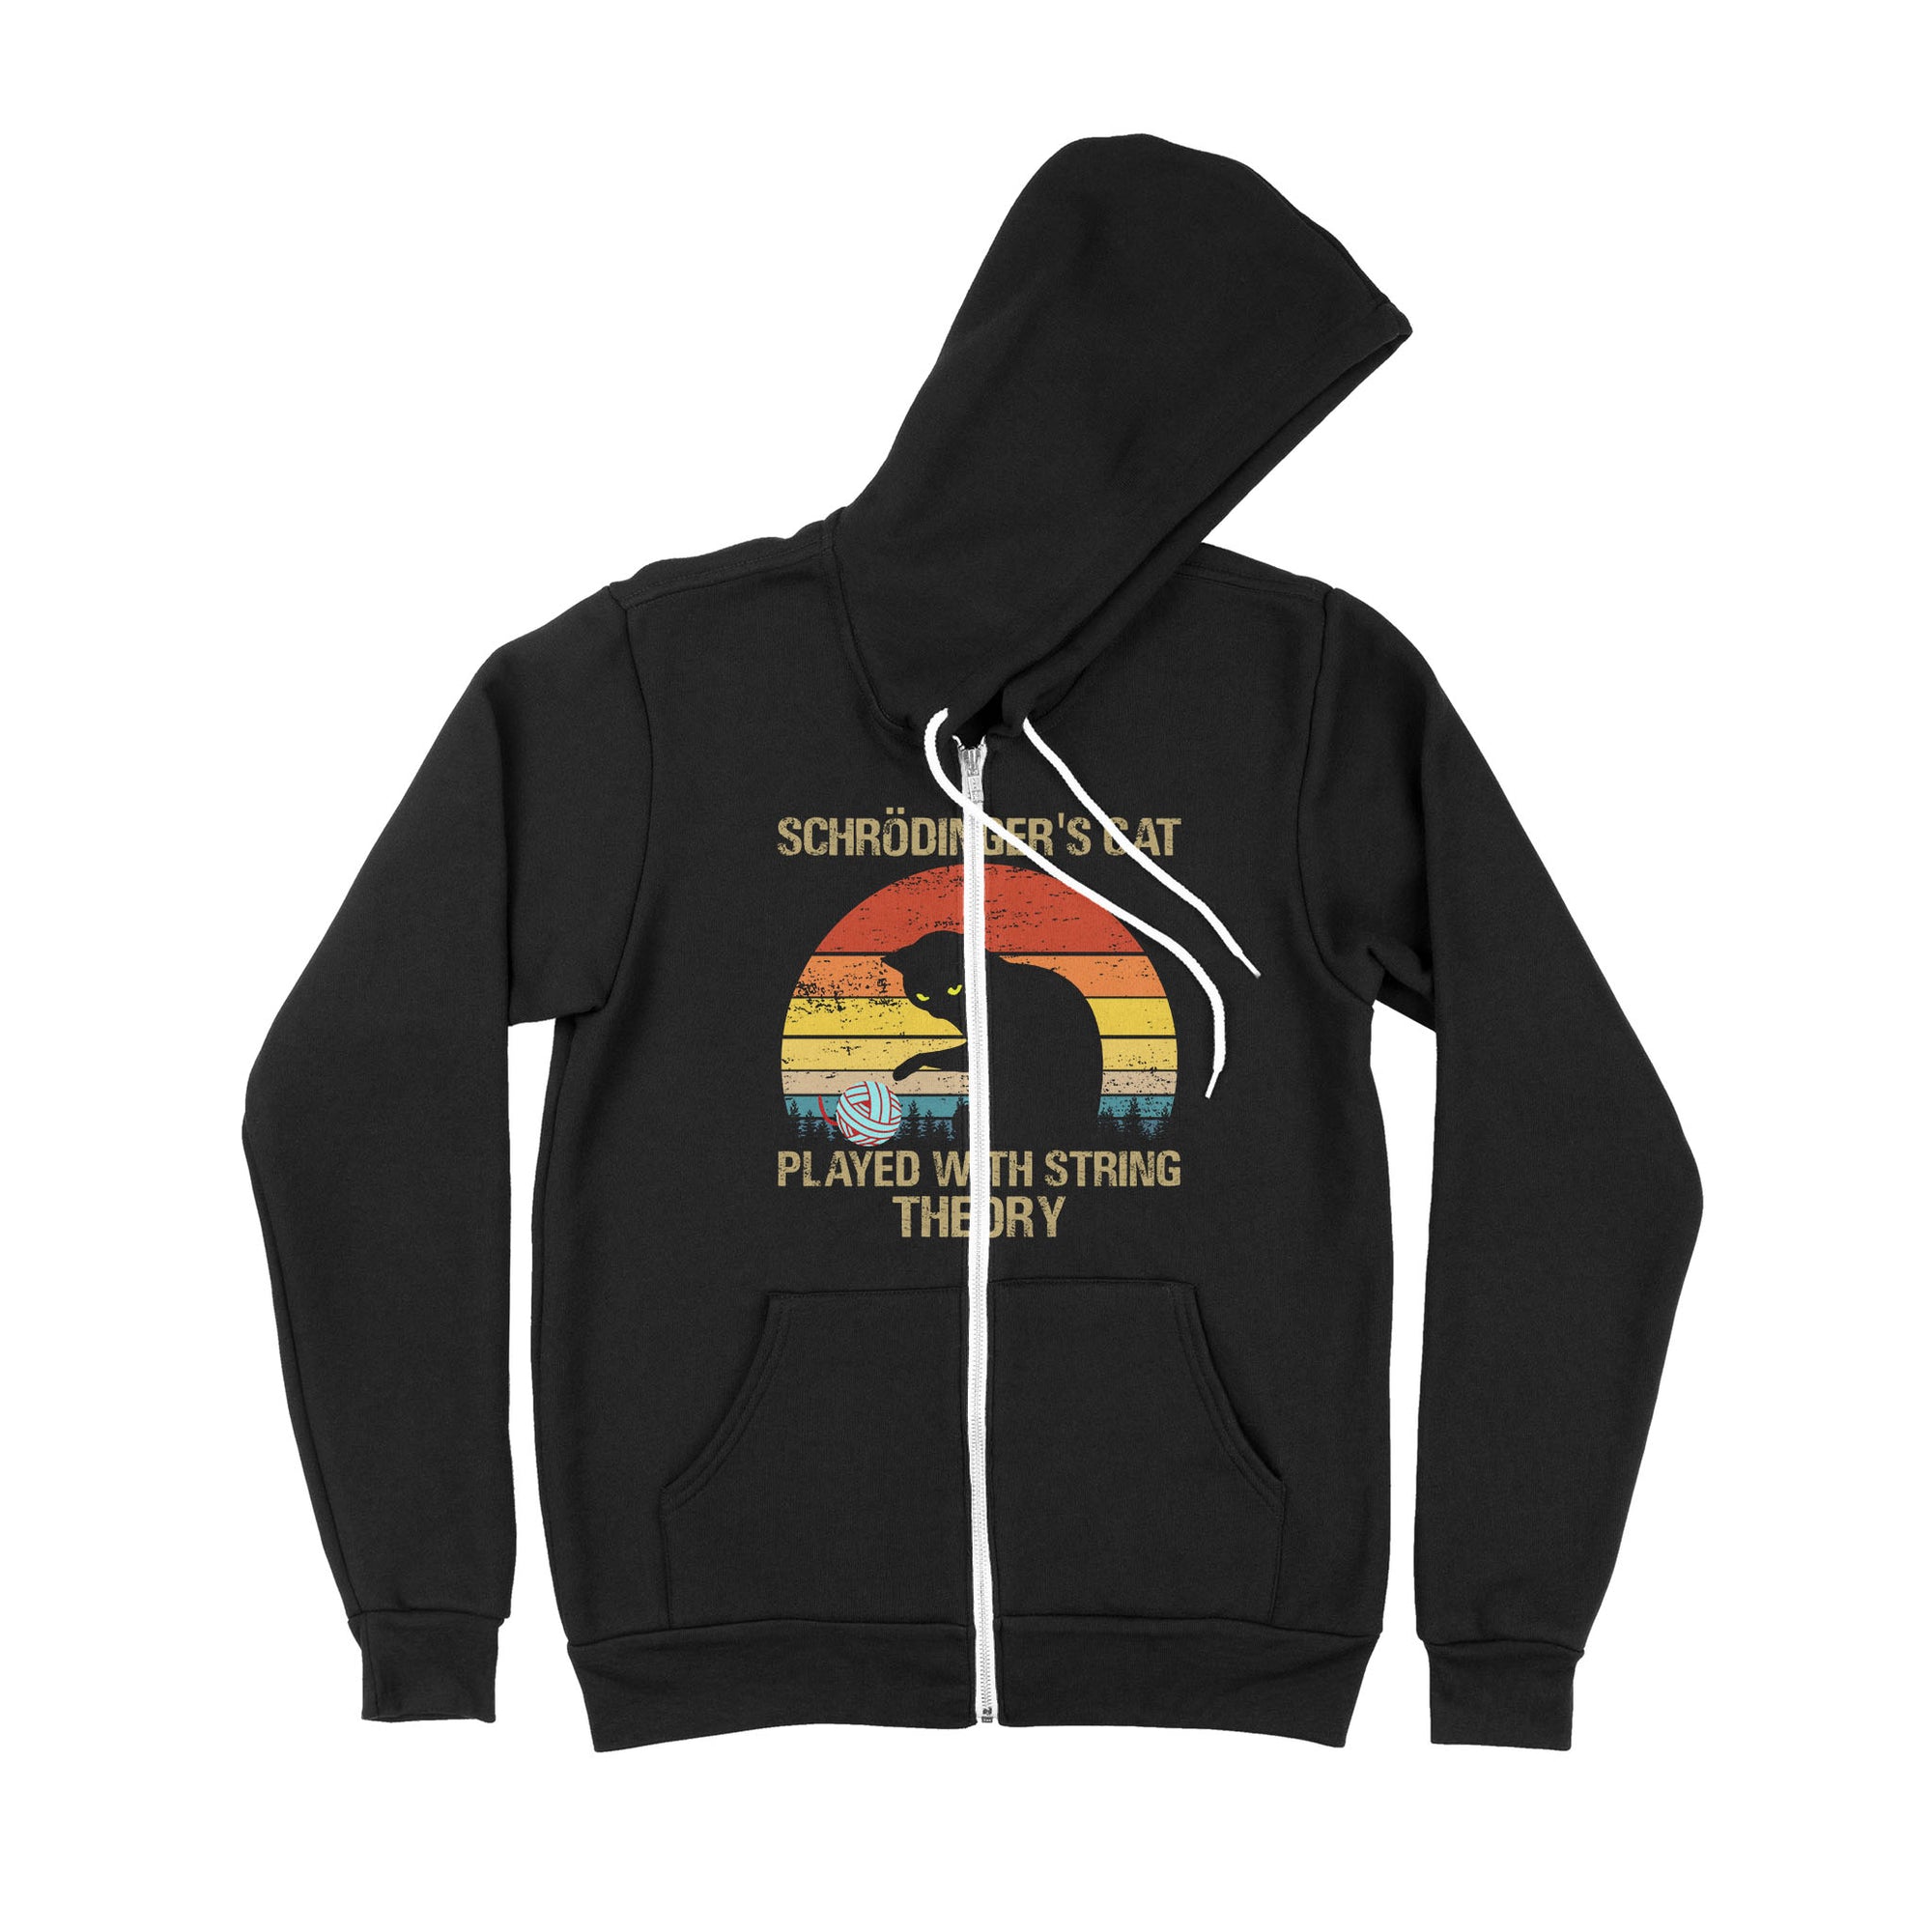 Schrodinger’s Cat Played With String Theory - Premium Zip Hoodie